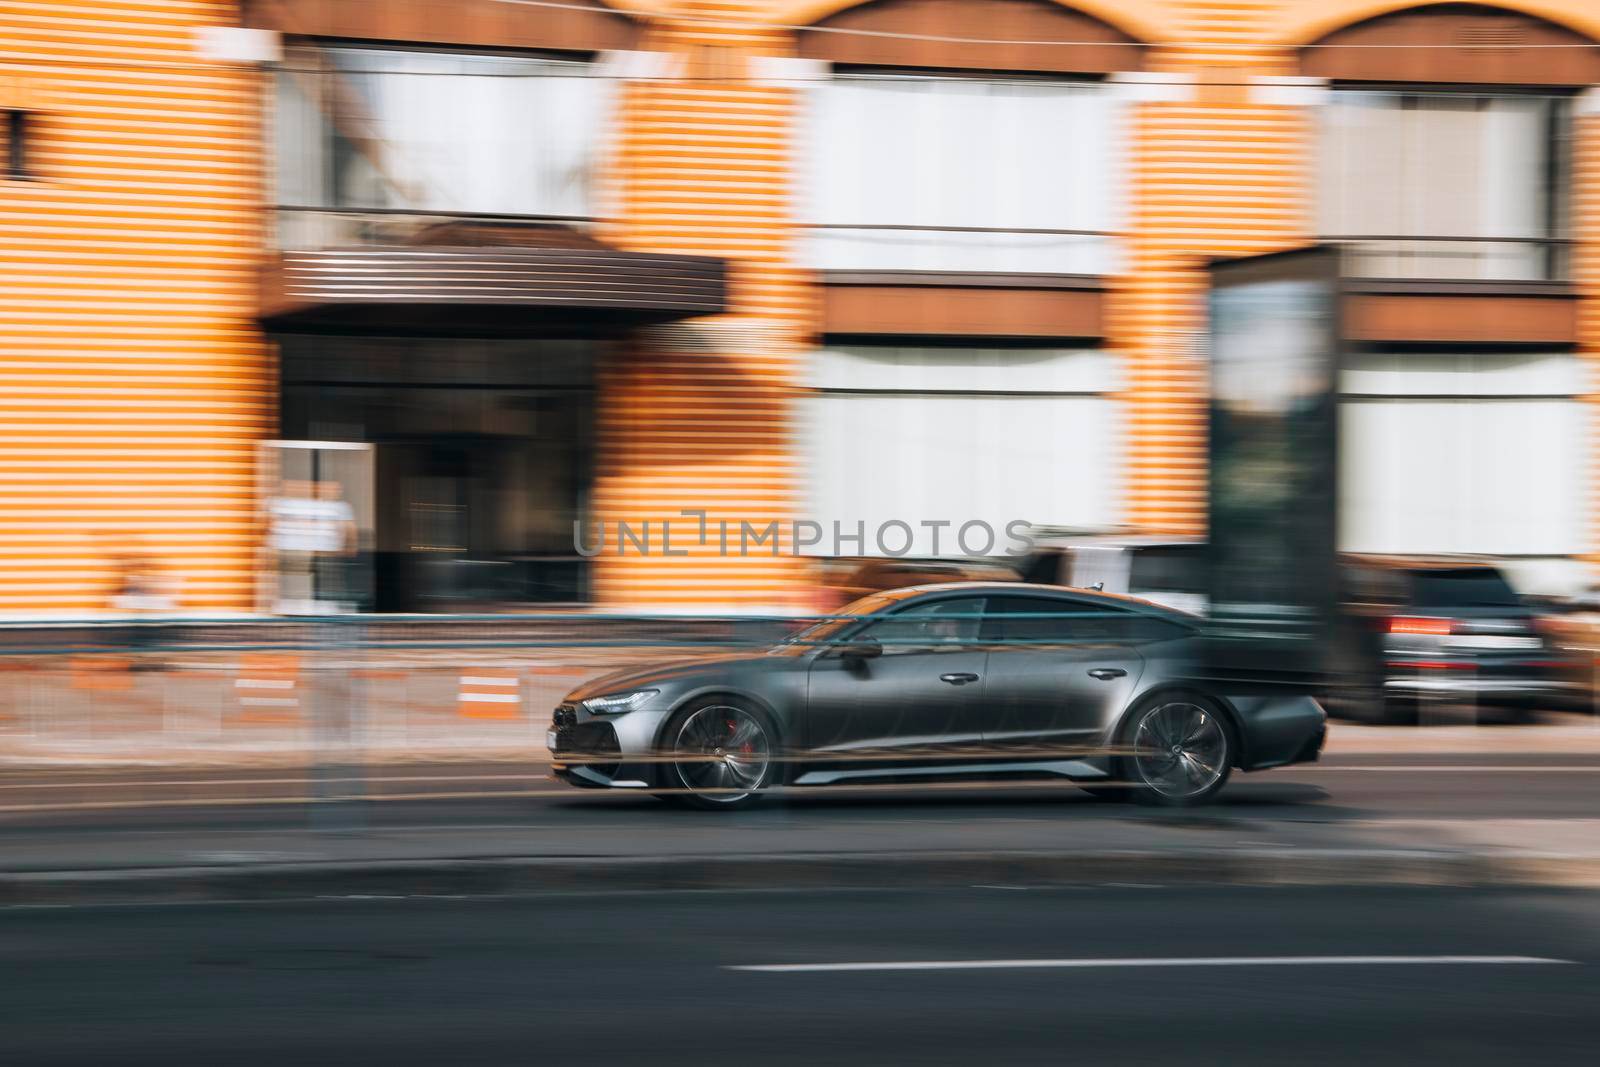 Ukraine, Kyiv - 16 July 2021: Silver Mercedes-Benz car moving on the street. Editorial